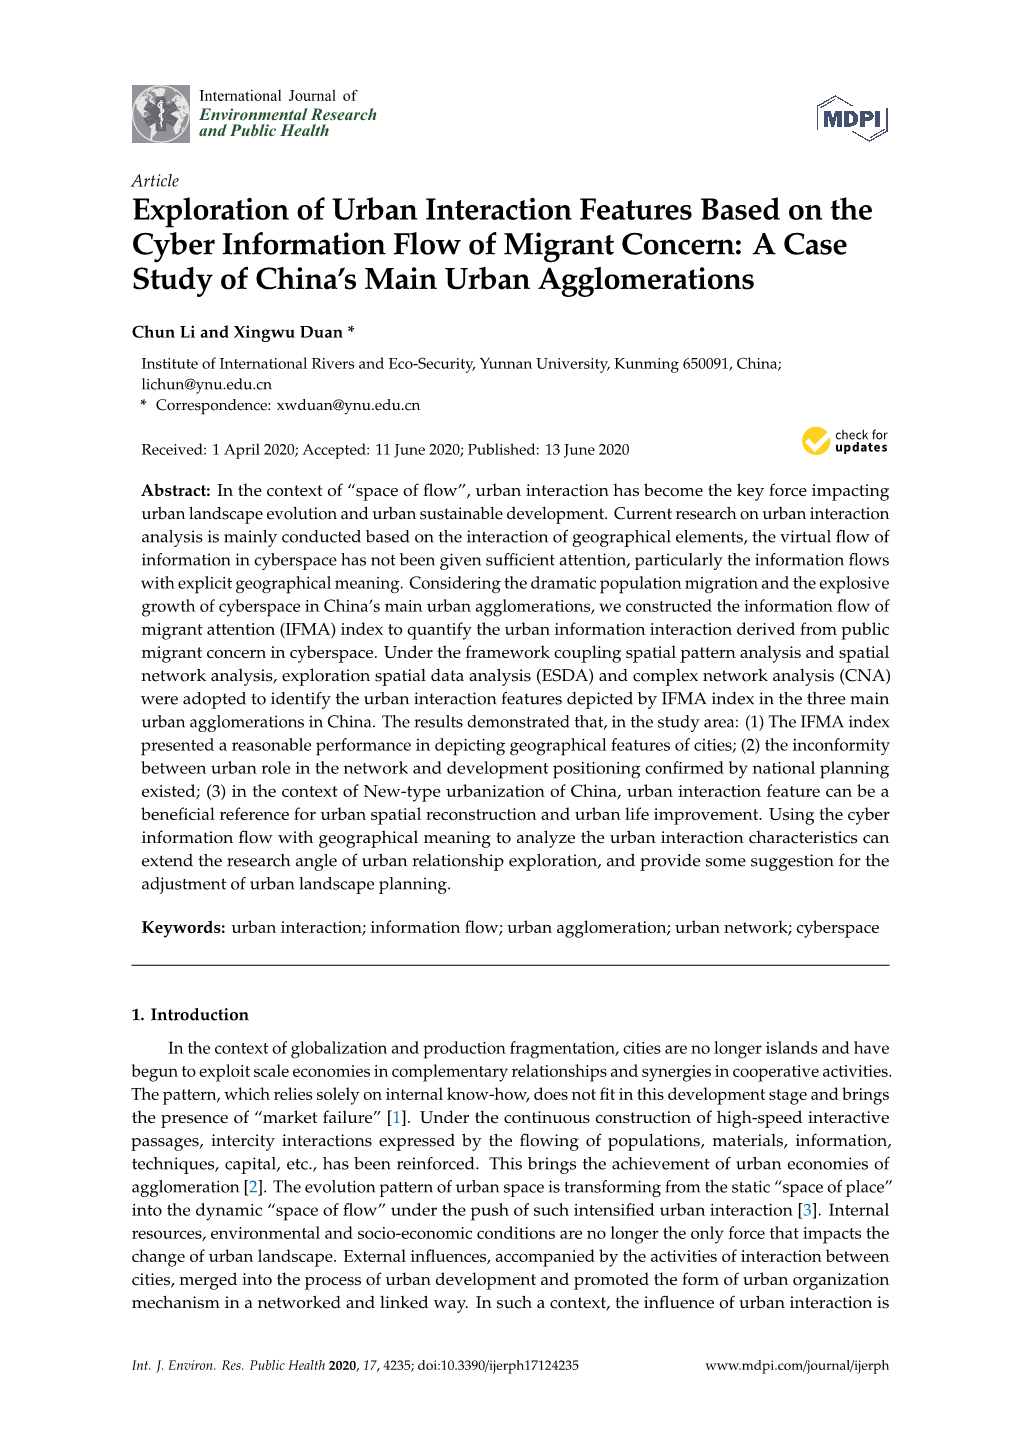 Exploration of Urban Interaction Features Based on the Cyber Information Flow of Migrant Concern: a Case Study of China’S Main Urban Agglomerations